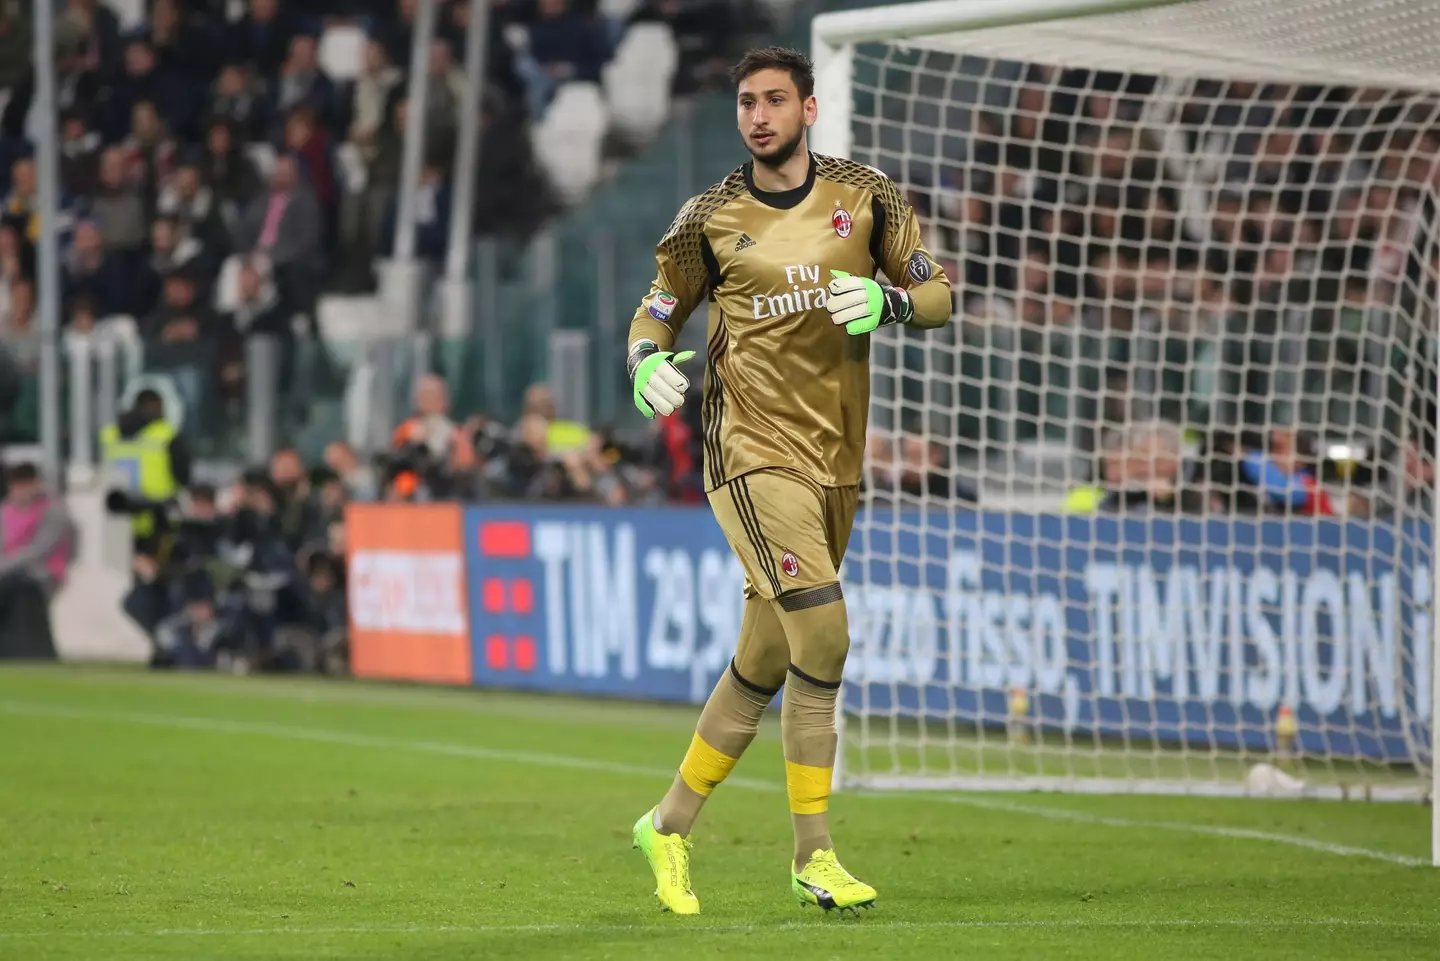 Donnarumma in action for AC Milan. Image